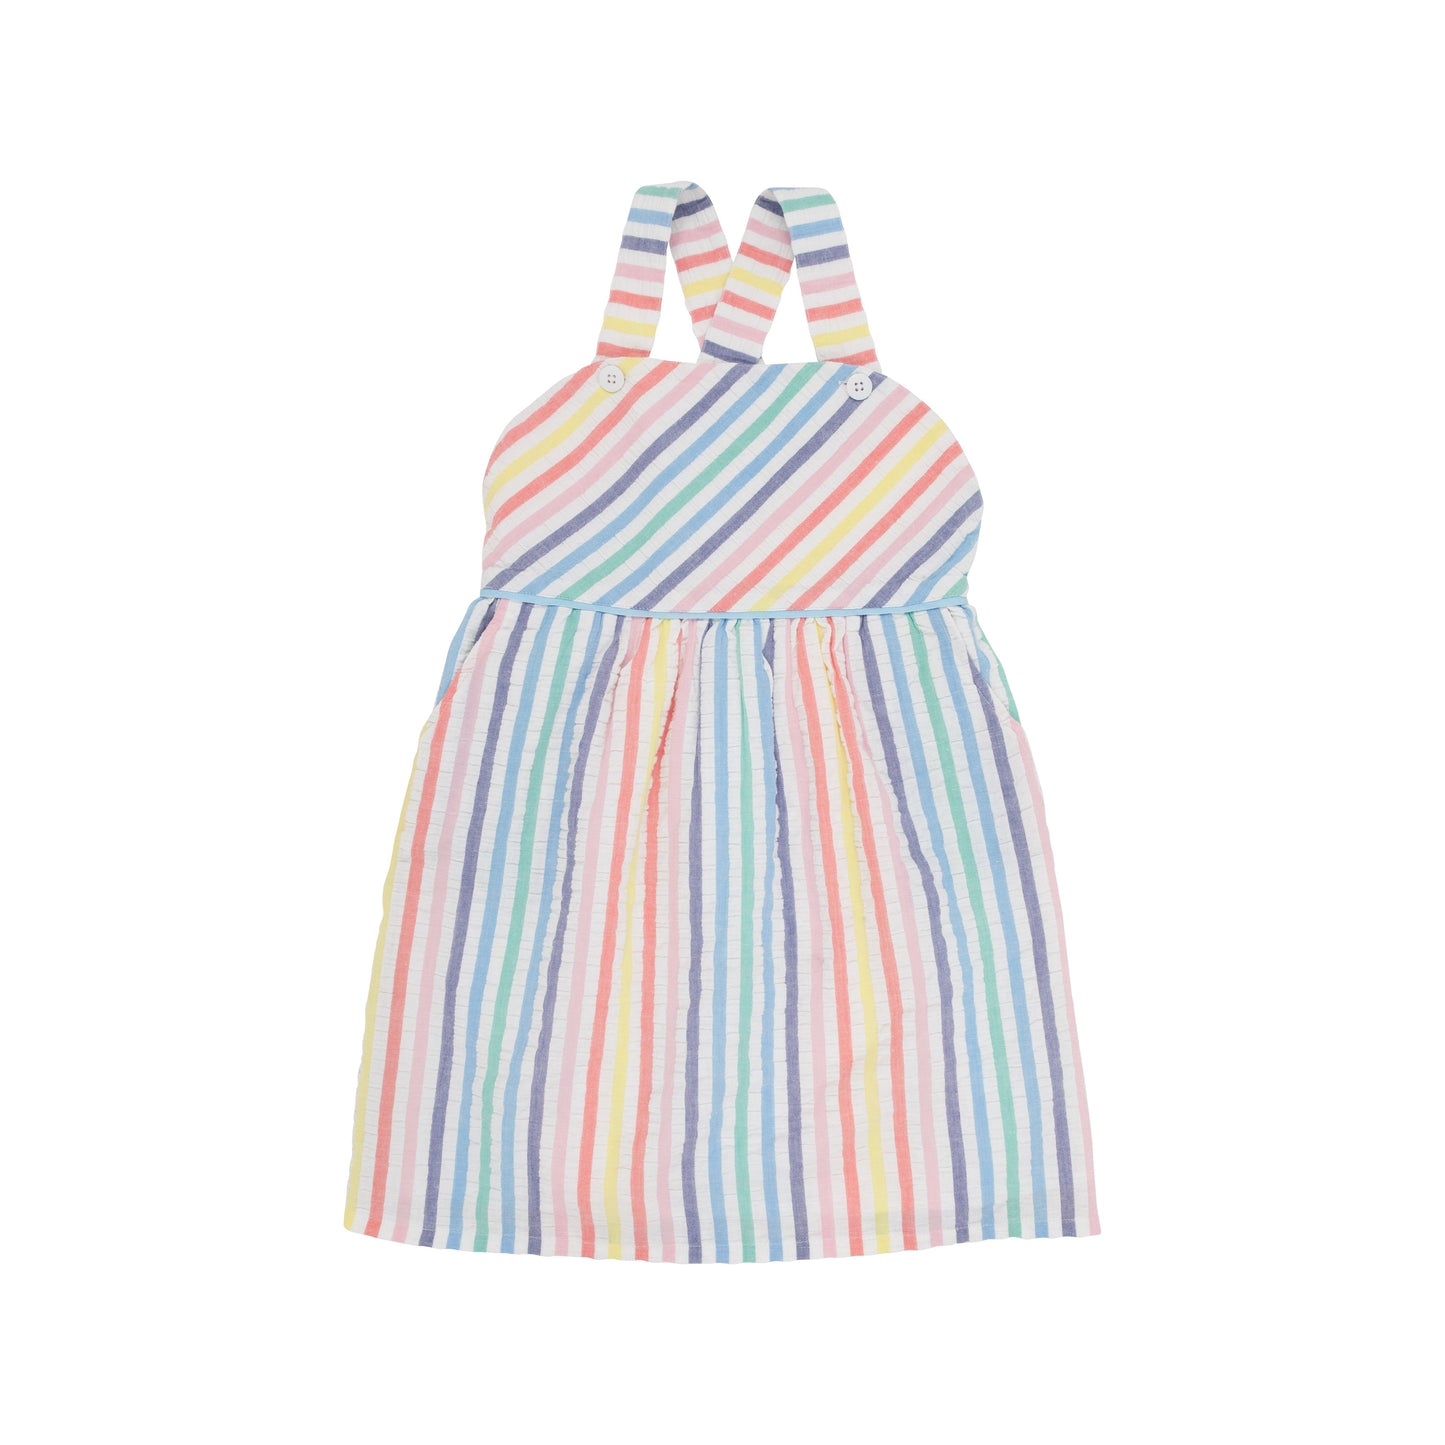 The Beaufort Bonnet - Ruthie Day Dress Happy Hues Seersucker With Beale Street Blue